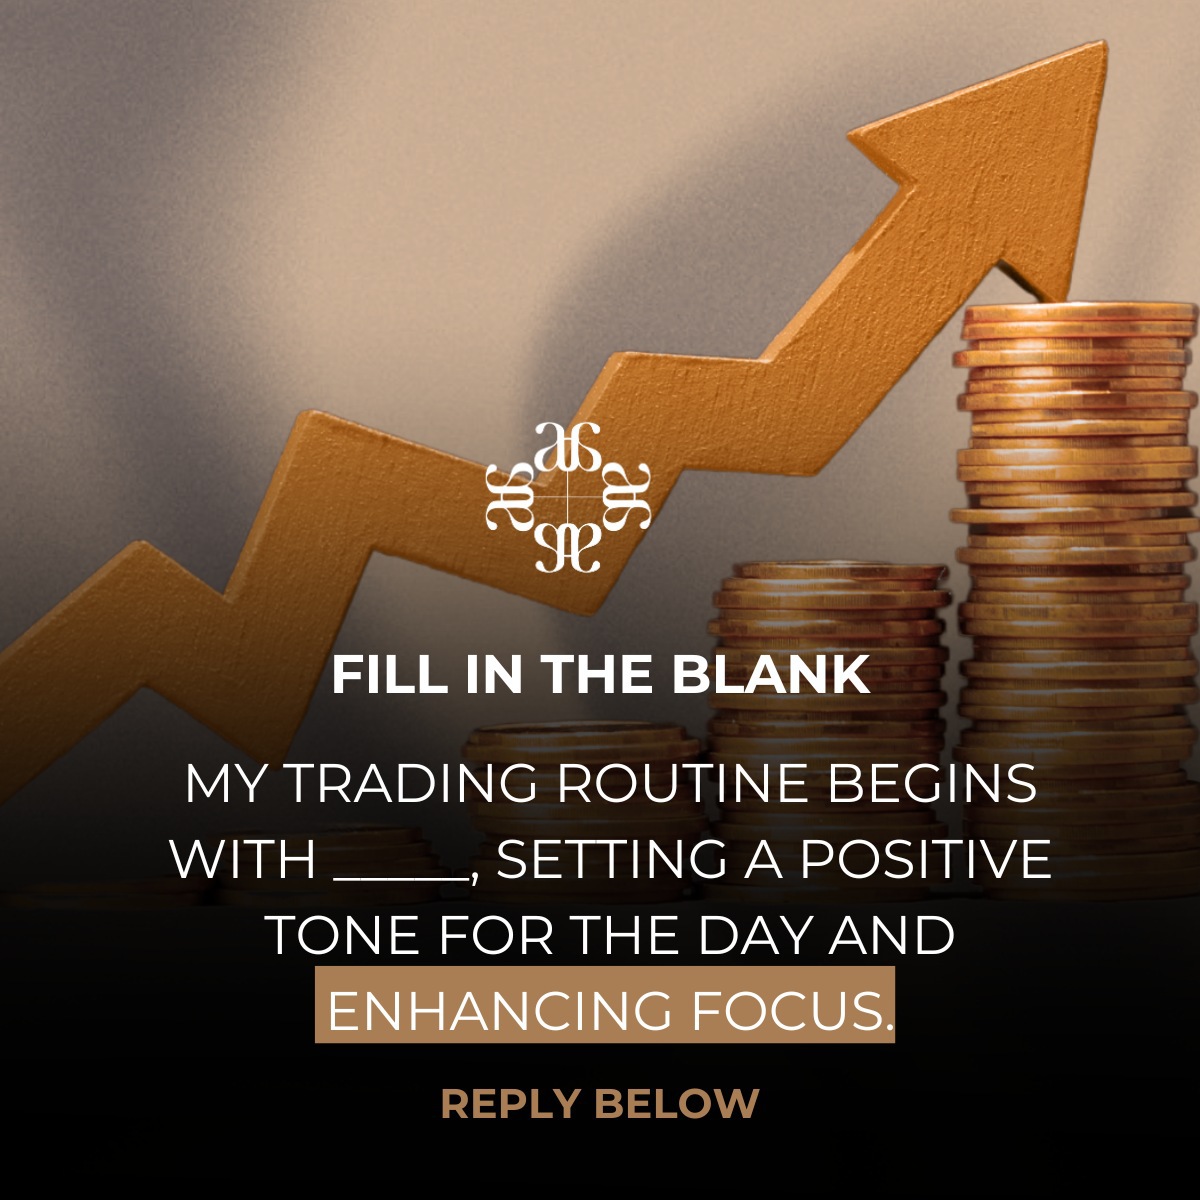 My trading routine begins with a mindful review of market news and key indicators.

This sets a positive tone, sharpens my focus, and prepares me for the day ahead.

How about you?

Share your trading routine in the comment section.

audacity.capital
#audacitycapital